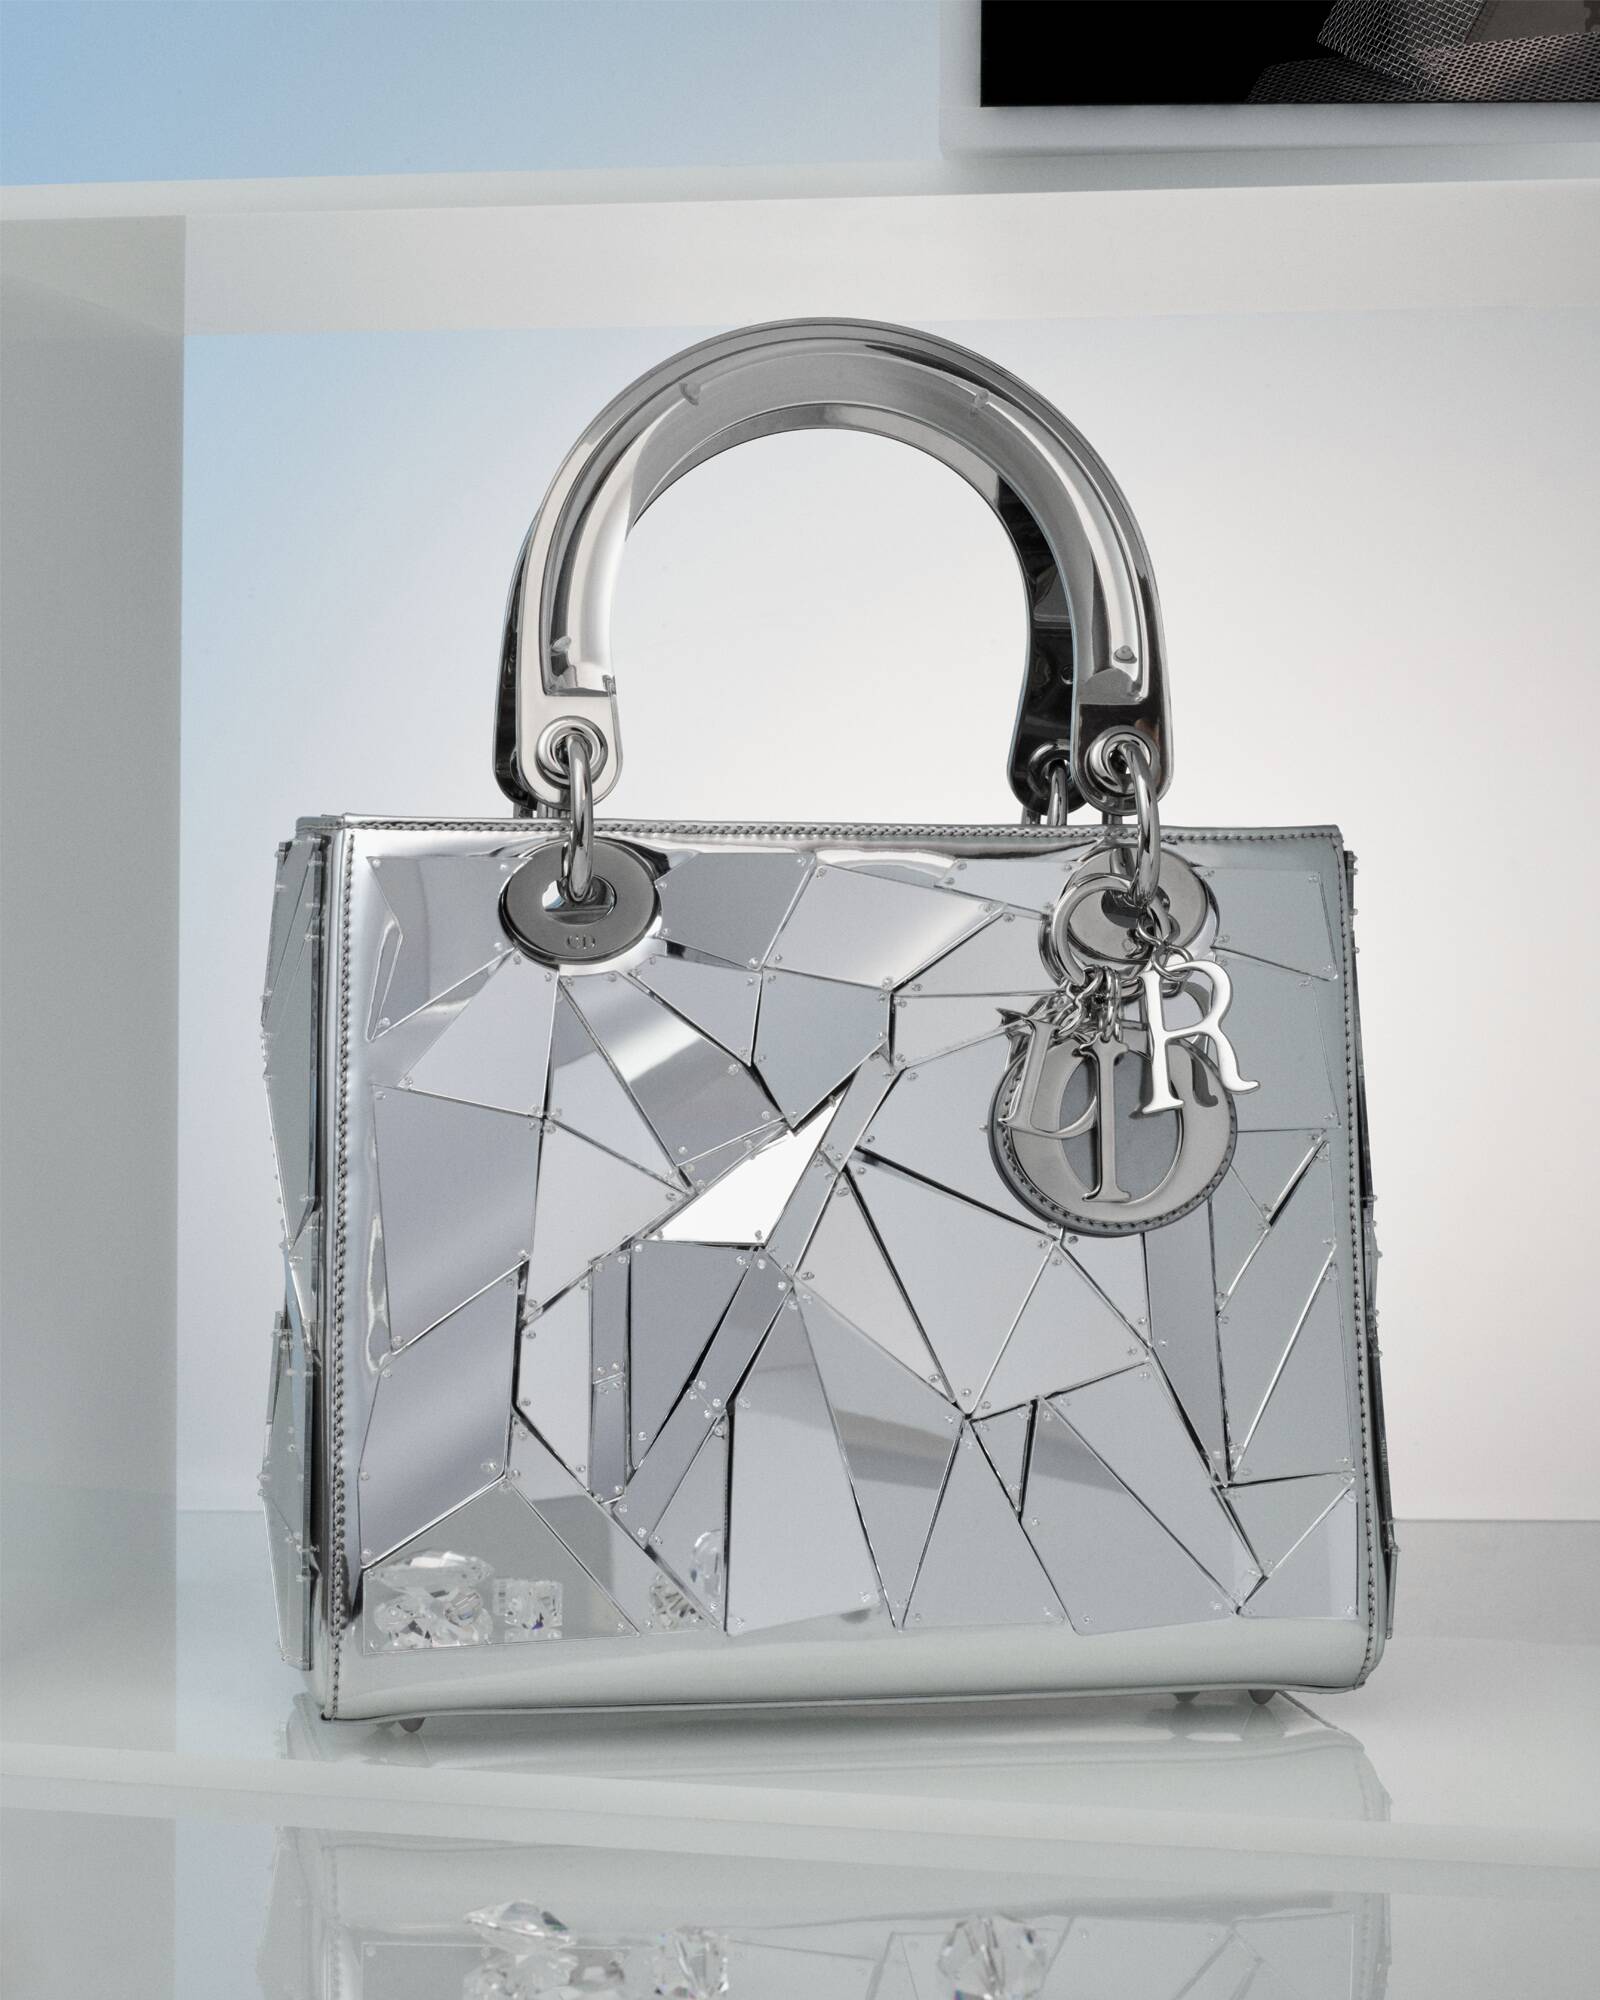 Dior Launches Dior Lady Art 2 at Flagship Store